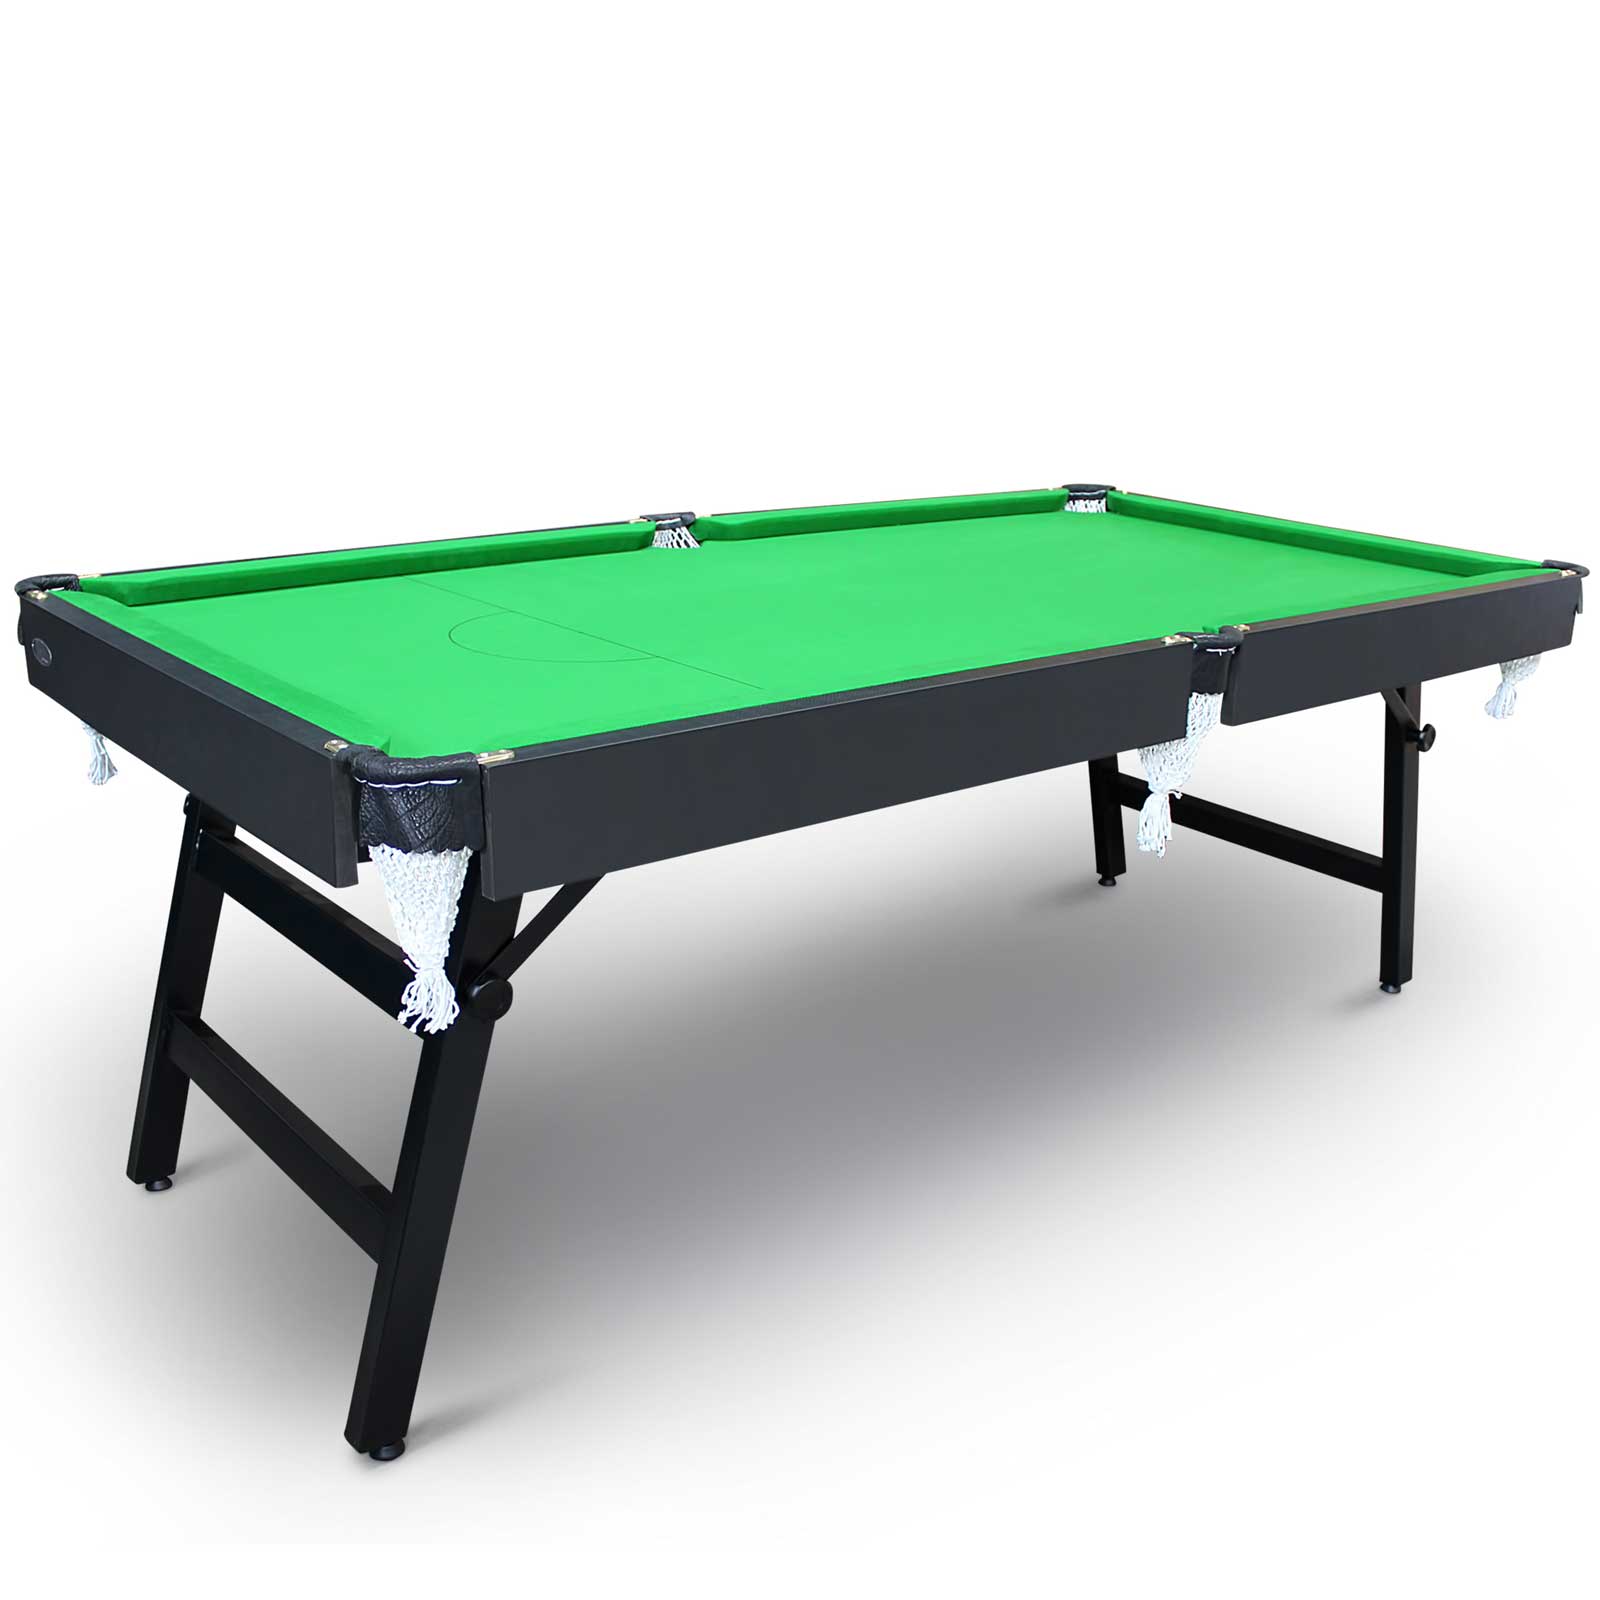 7 Foot MDF Based Folding Pool Table | All Table Sports